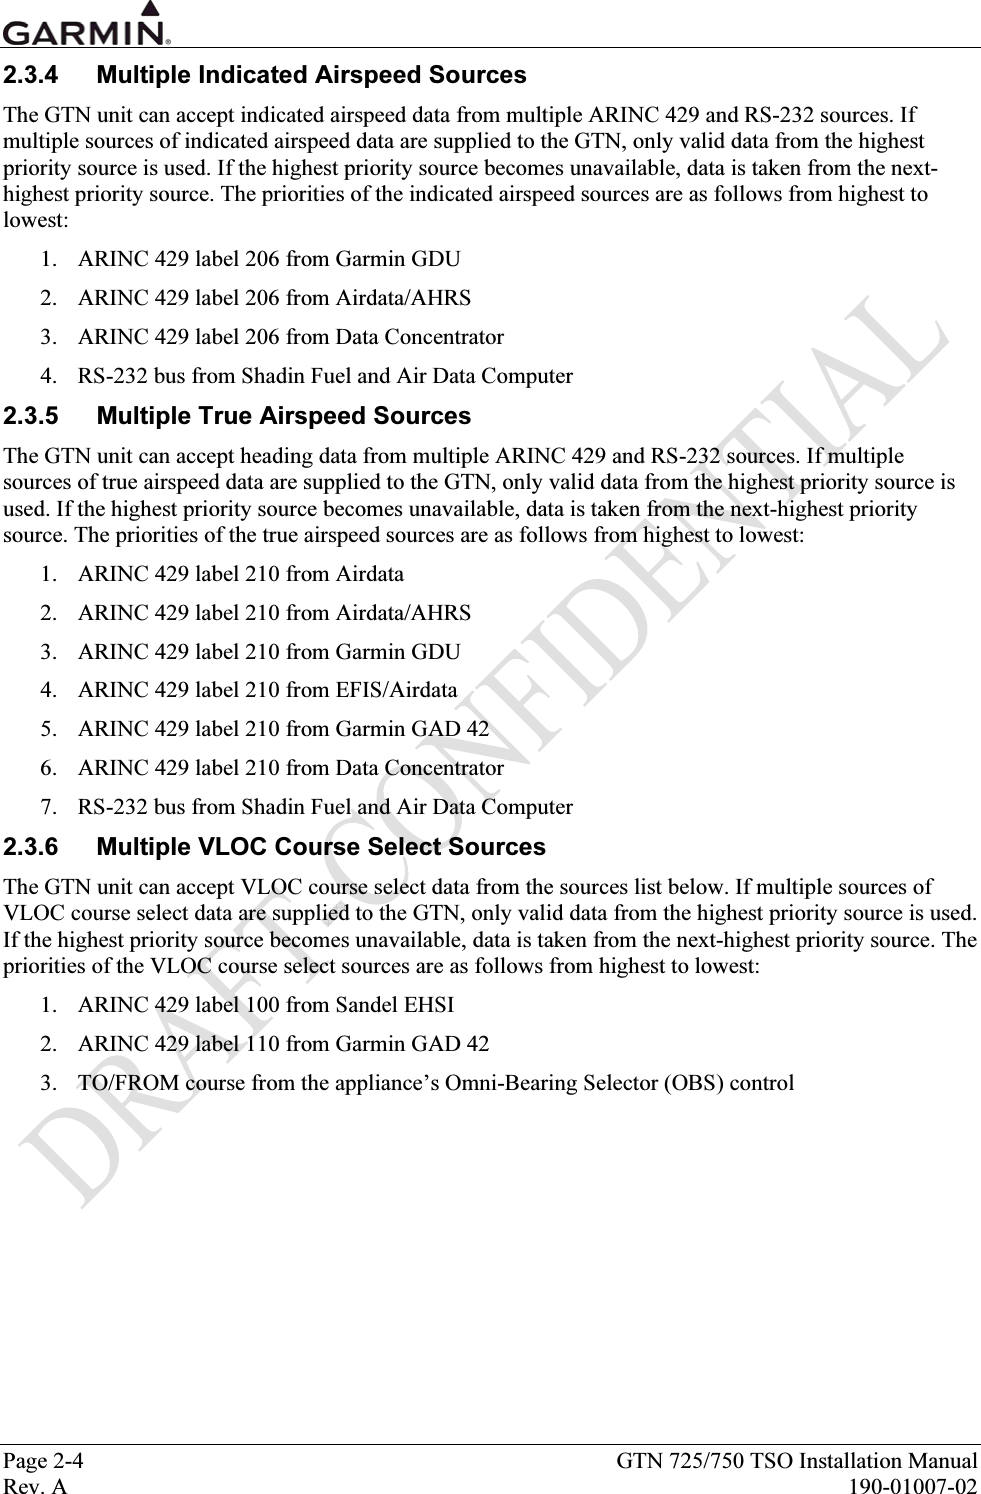  Page 2-4  GTN 725/750 TSO Installation Manual Rev. A  190-01007-02 2.3.4  Multiple Indicated Airspeed Sources The GTN unit can accept indicated airspeed data from multiple ARINC 429 and RS-232 sources. If multiple sources of indicated airspeed data are supplied to the GTN, only valid data from the highest priority source is used. If the highest priority source becomes unavailable, data is taken from the next-highest priority source. The priorities of the indicated airspeed sources are as follows from highest to lowest: 1. ARINC 429 label 206 from Garmin GDU 2. ARINC 429 label 206 from Airdata/AHRS 3. ARINC 429 label 206 from Data Concentrator 4. RS-232 bus from Shadin Fuel and Air Data Computer 2.3.5  Multiple True Airspeed Sources The GTN unit can accept heading data from multiple ARINC 429 and RS-232 sources. If multiple sources of true airspeed data are supplied to the GTN, only valid data from the highest priority source is used. If the highest priority source becomes unavailable, data is taken from the next-highest priority source. The priorities of the true airspeed sources are as follows from highest to lowest: 1. ARINC 429 label 210 from Airdata 2. ARINC 429 label 210 from Airdata/AHRS 3. ARINC 429 label 210 from Garmin GDU 4. ARINC 429 label 210 from EFIS/Airdata 5. ARINC 429 label 210 from Garmin GAD 42 6. ARINC 429 label 210 from Data Concentrator 7. RS-232 bus from Shadin Fuel and Air Data Computer 2.3.6  Multiple VLOC Course Select Sources The GTN unit can accept VLOC course select data from the sources list below. If multiple sources of VLOC course select data are supplied to the GTN, only valid data from the highest priority source is used. If the highest priority source becomes unavailable, data is taken from the next-highest priority source. The priorities of the VLOC course select sources are as follows from highest to lowest: 1. ARINC 429 label 100 from Sandel EHSI 2. ARINC 429 label 110 from Garmin GAD 42 3. TO/FROM course from the appliance’s Omni-Bearing Selector (OBS) control 